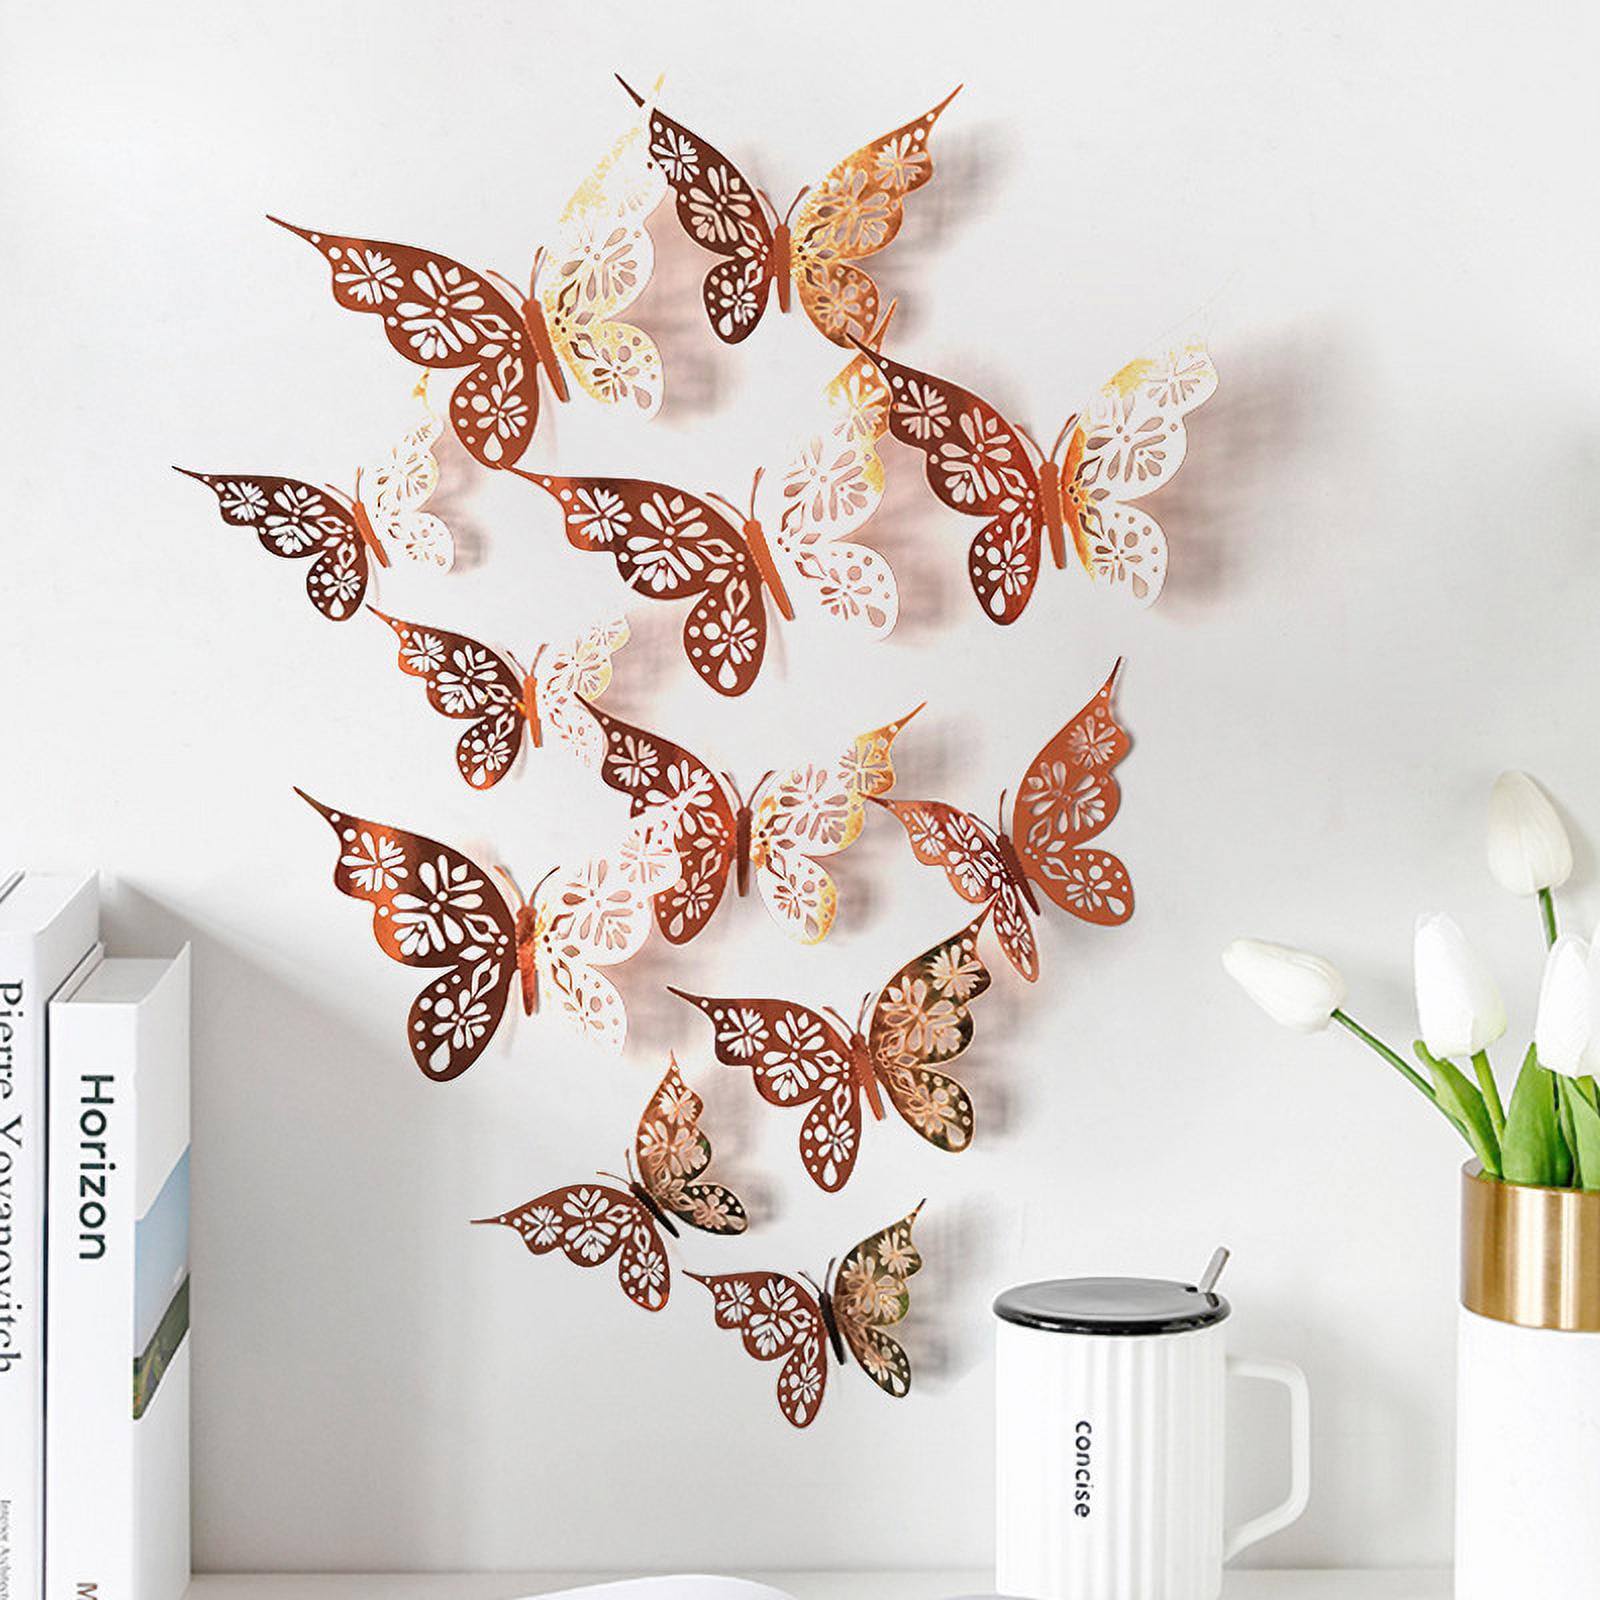 Details about   Mirror Butterfly Sticker 3D Wall Sticker Decor For Home Party Decorations 24 pcs 